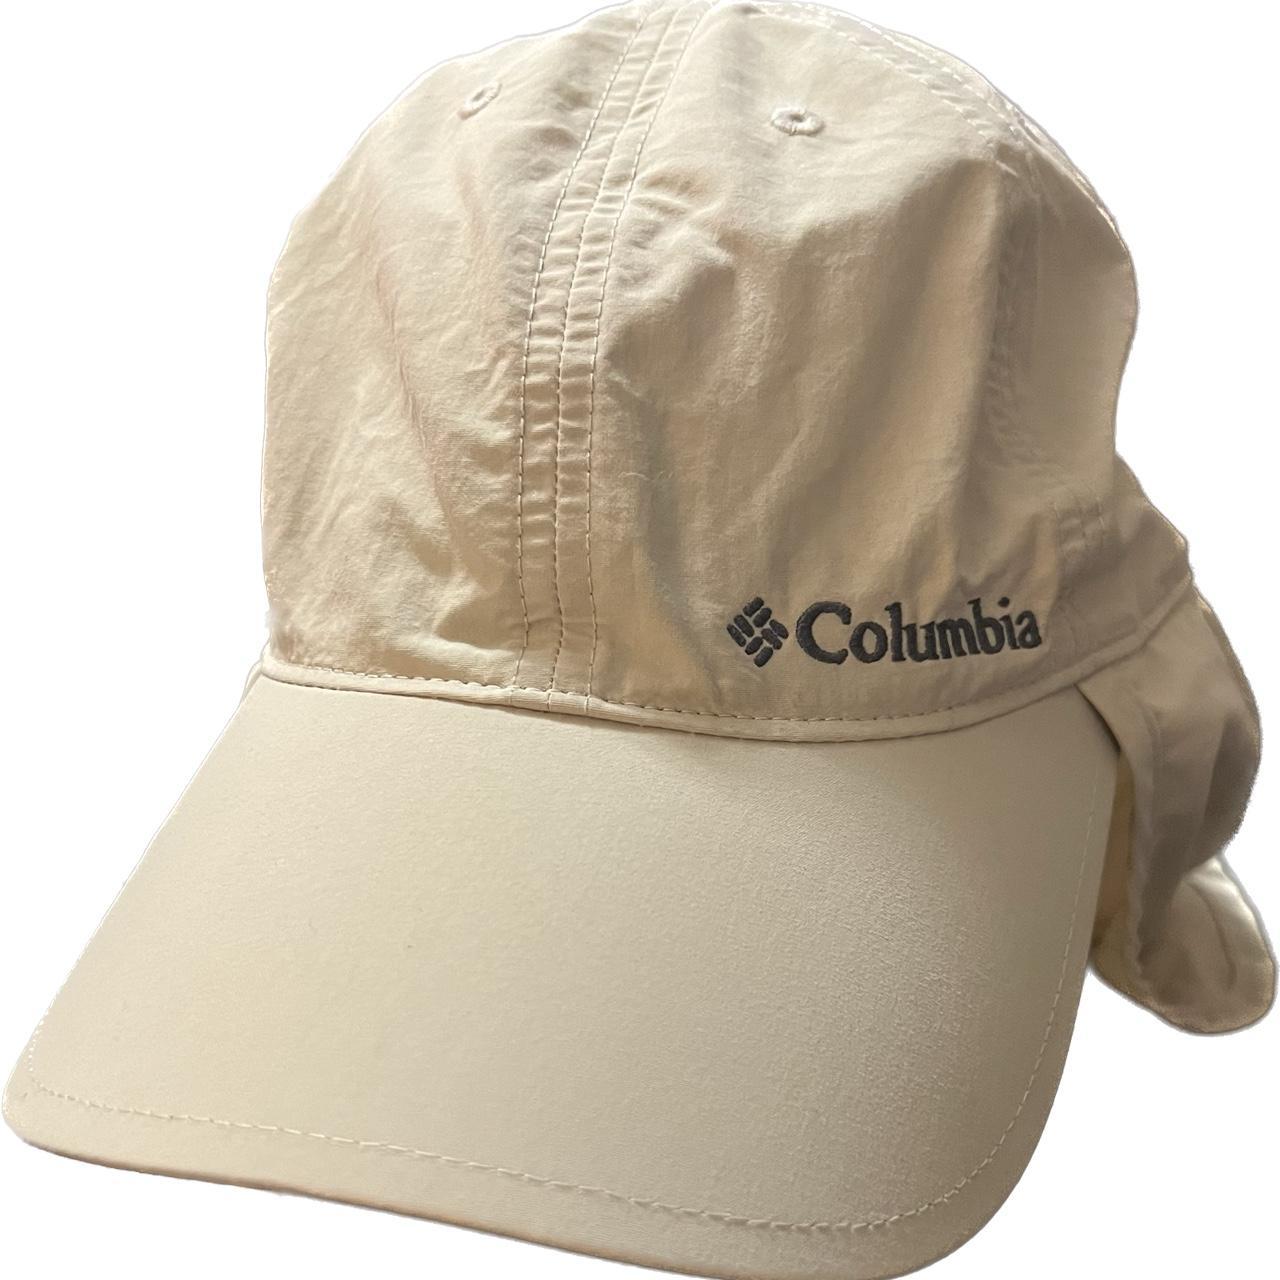 Columbia fishing hat. Adjustable one size fits all. - Depop